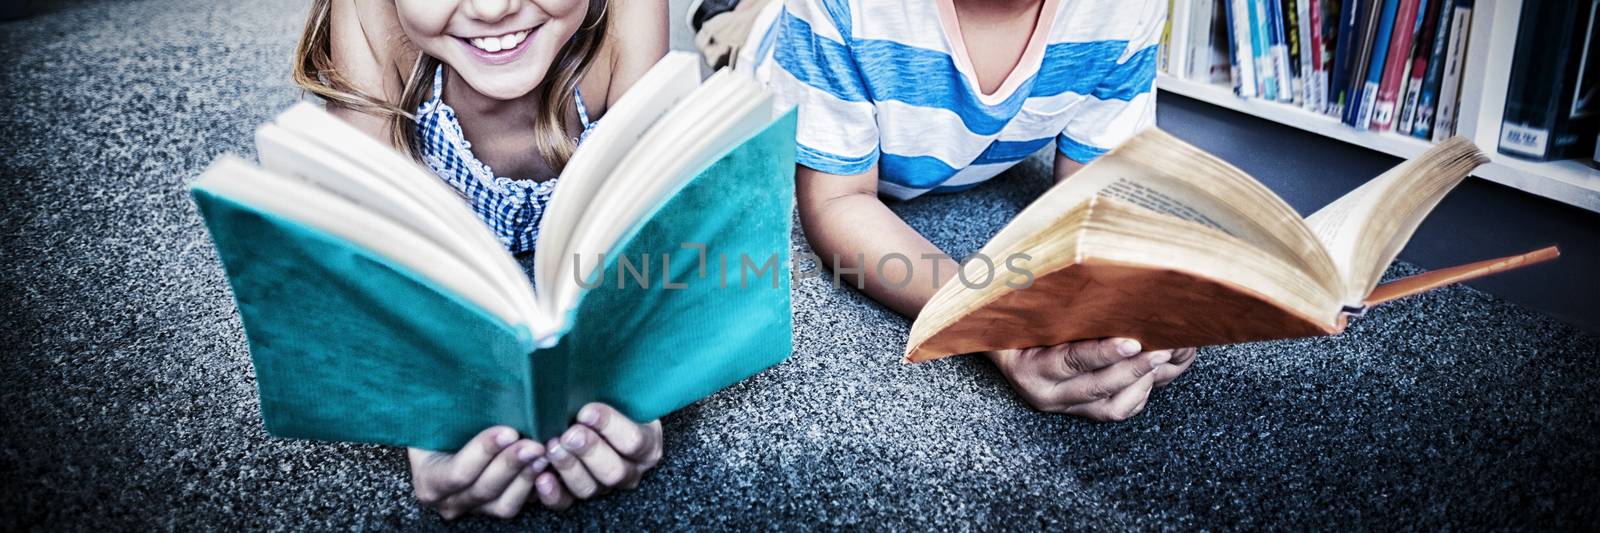 Happy school kids lying on floor and reading a book in library by Wavebreakmedia